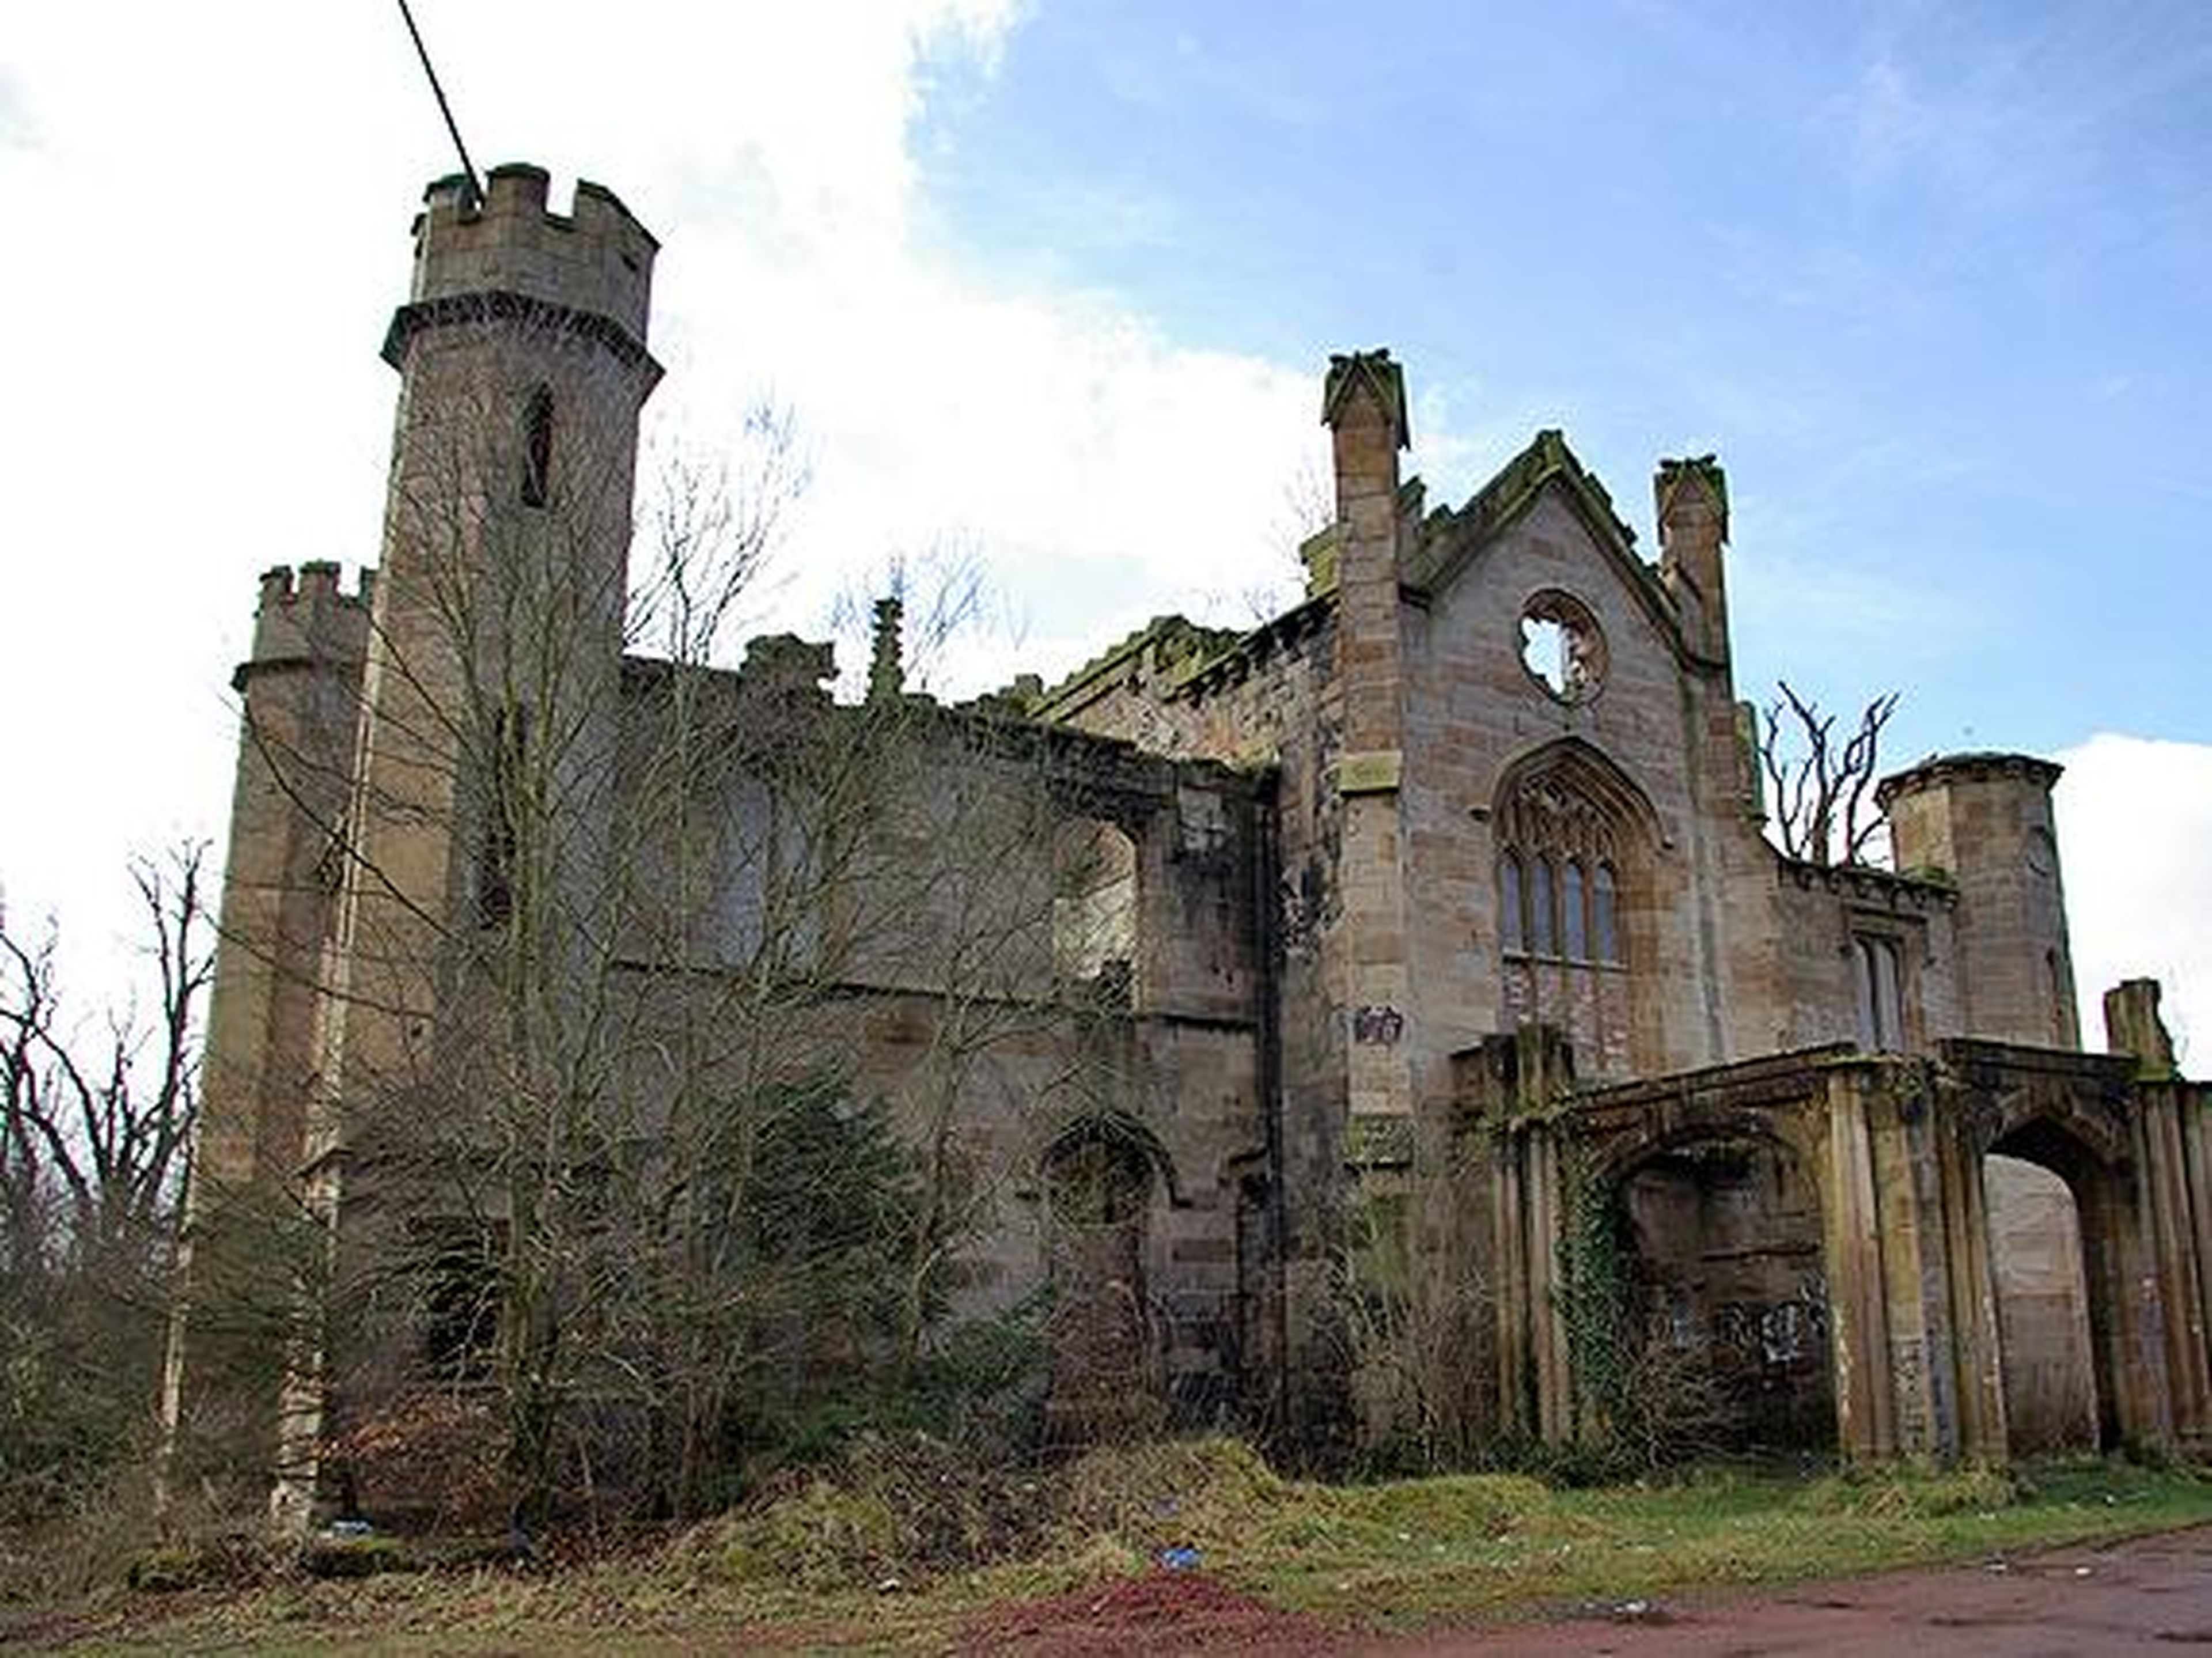 Cambusnethan House is on Scotland's Buildings at Risk Register at a "critical" risk level. A group called "Friends of Cambusnethan Priory" was established in 2014 to try to save the building from any further deterioration.